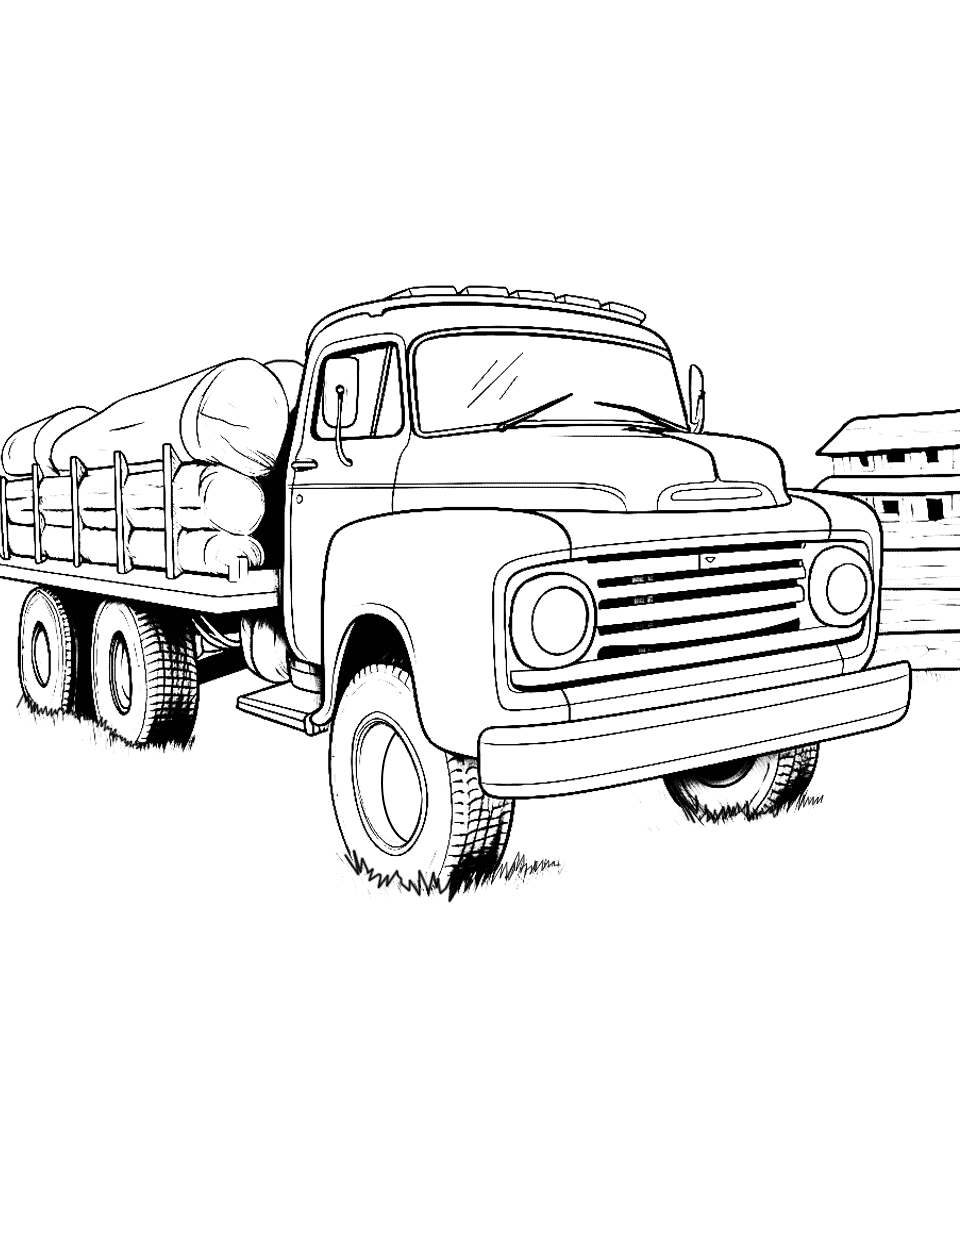 Old Farm Truck Coloring Page - An old truck loaded with tree trunks in a serene farm setting.